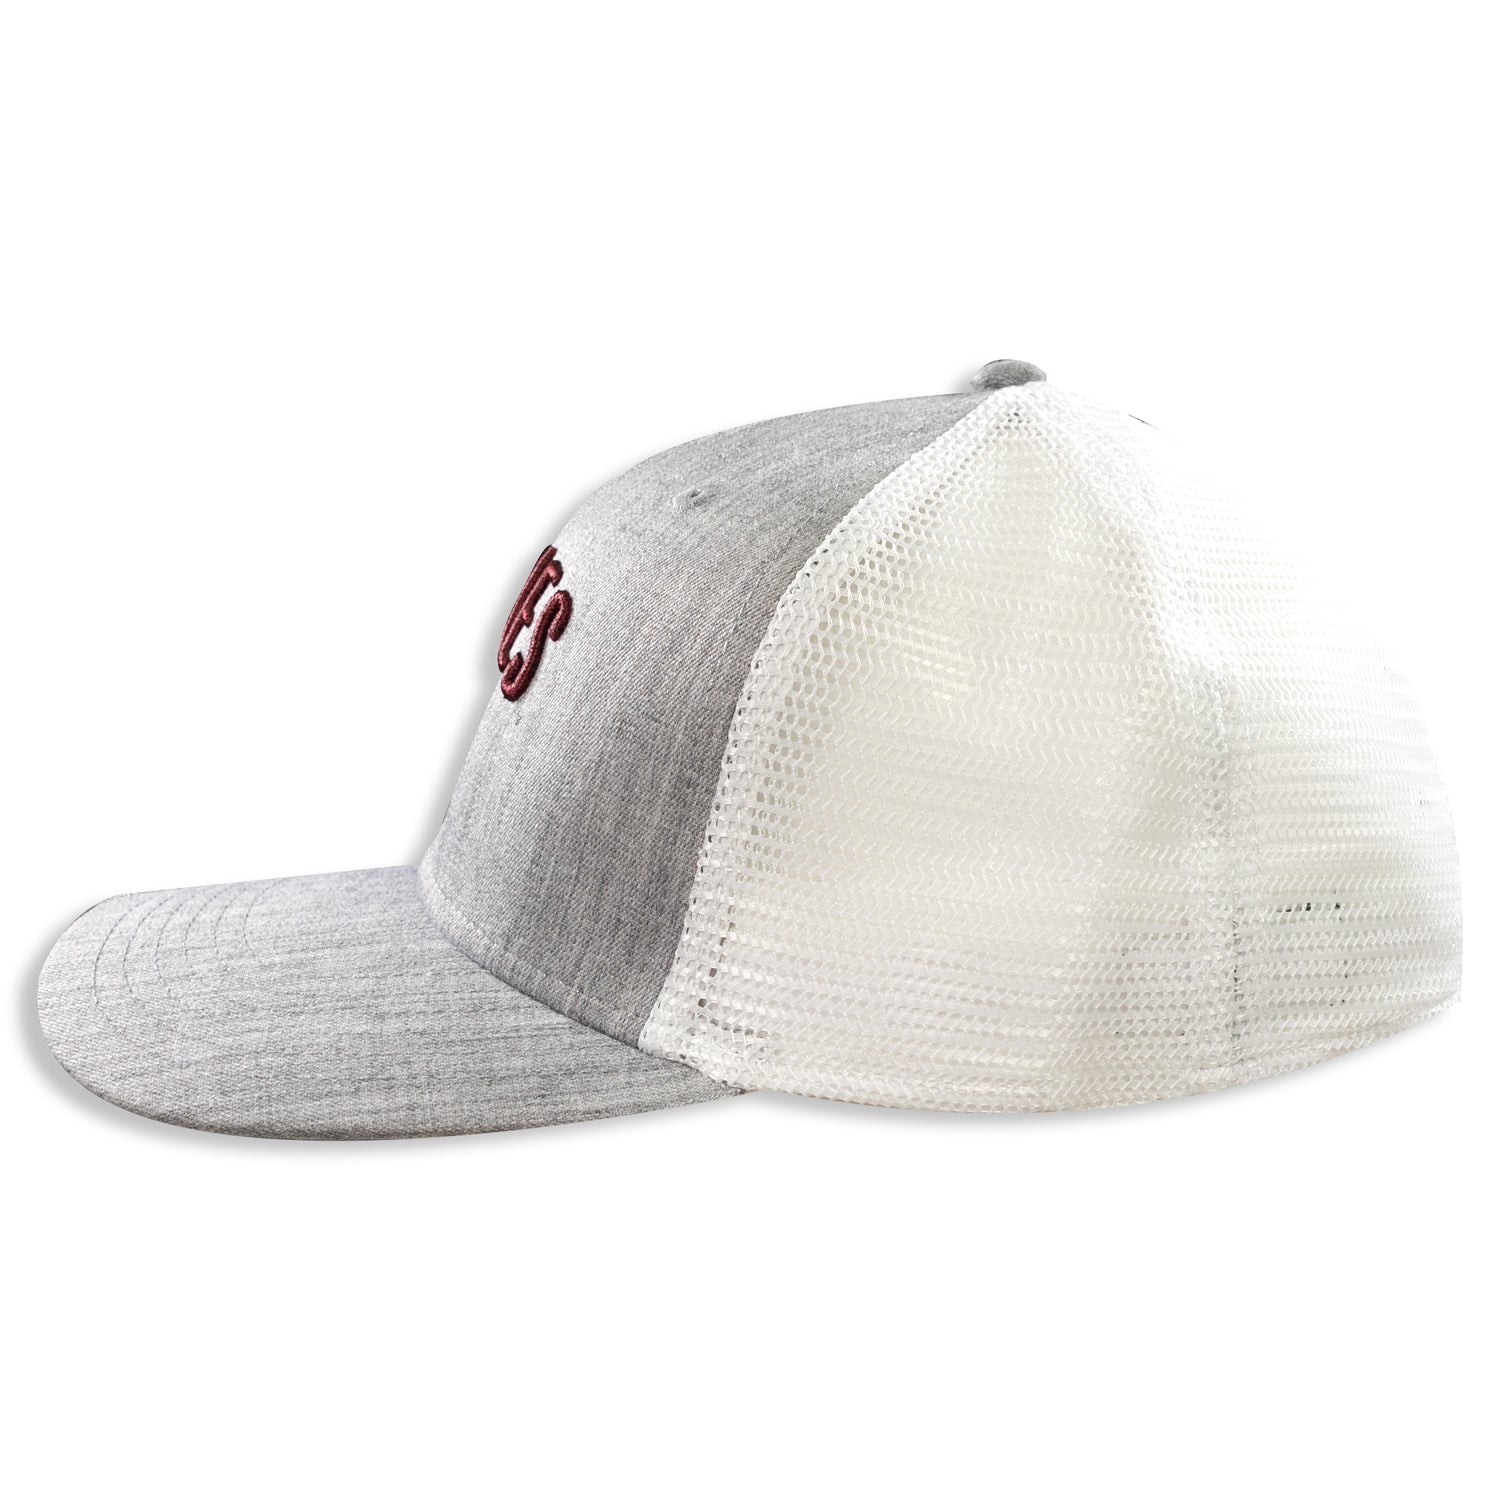 Mid Pro Texas A&M Arch Hat